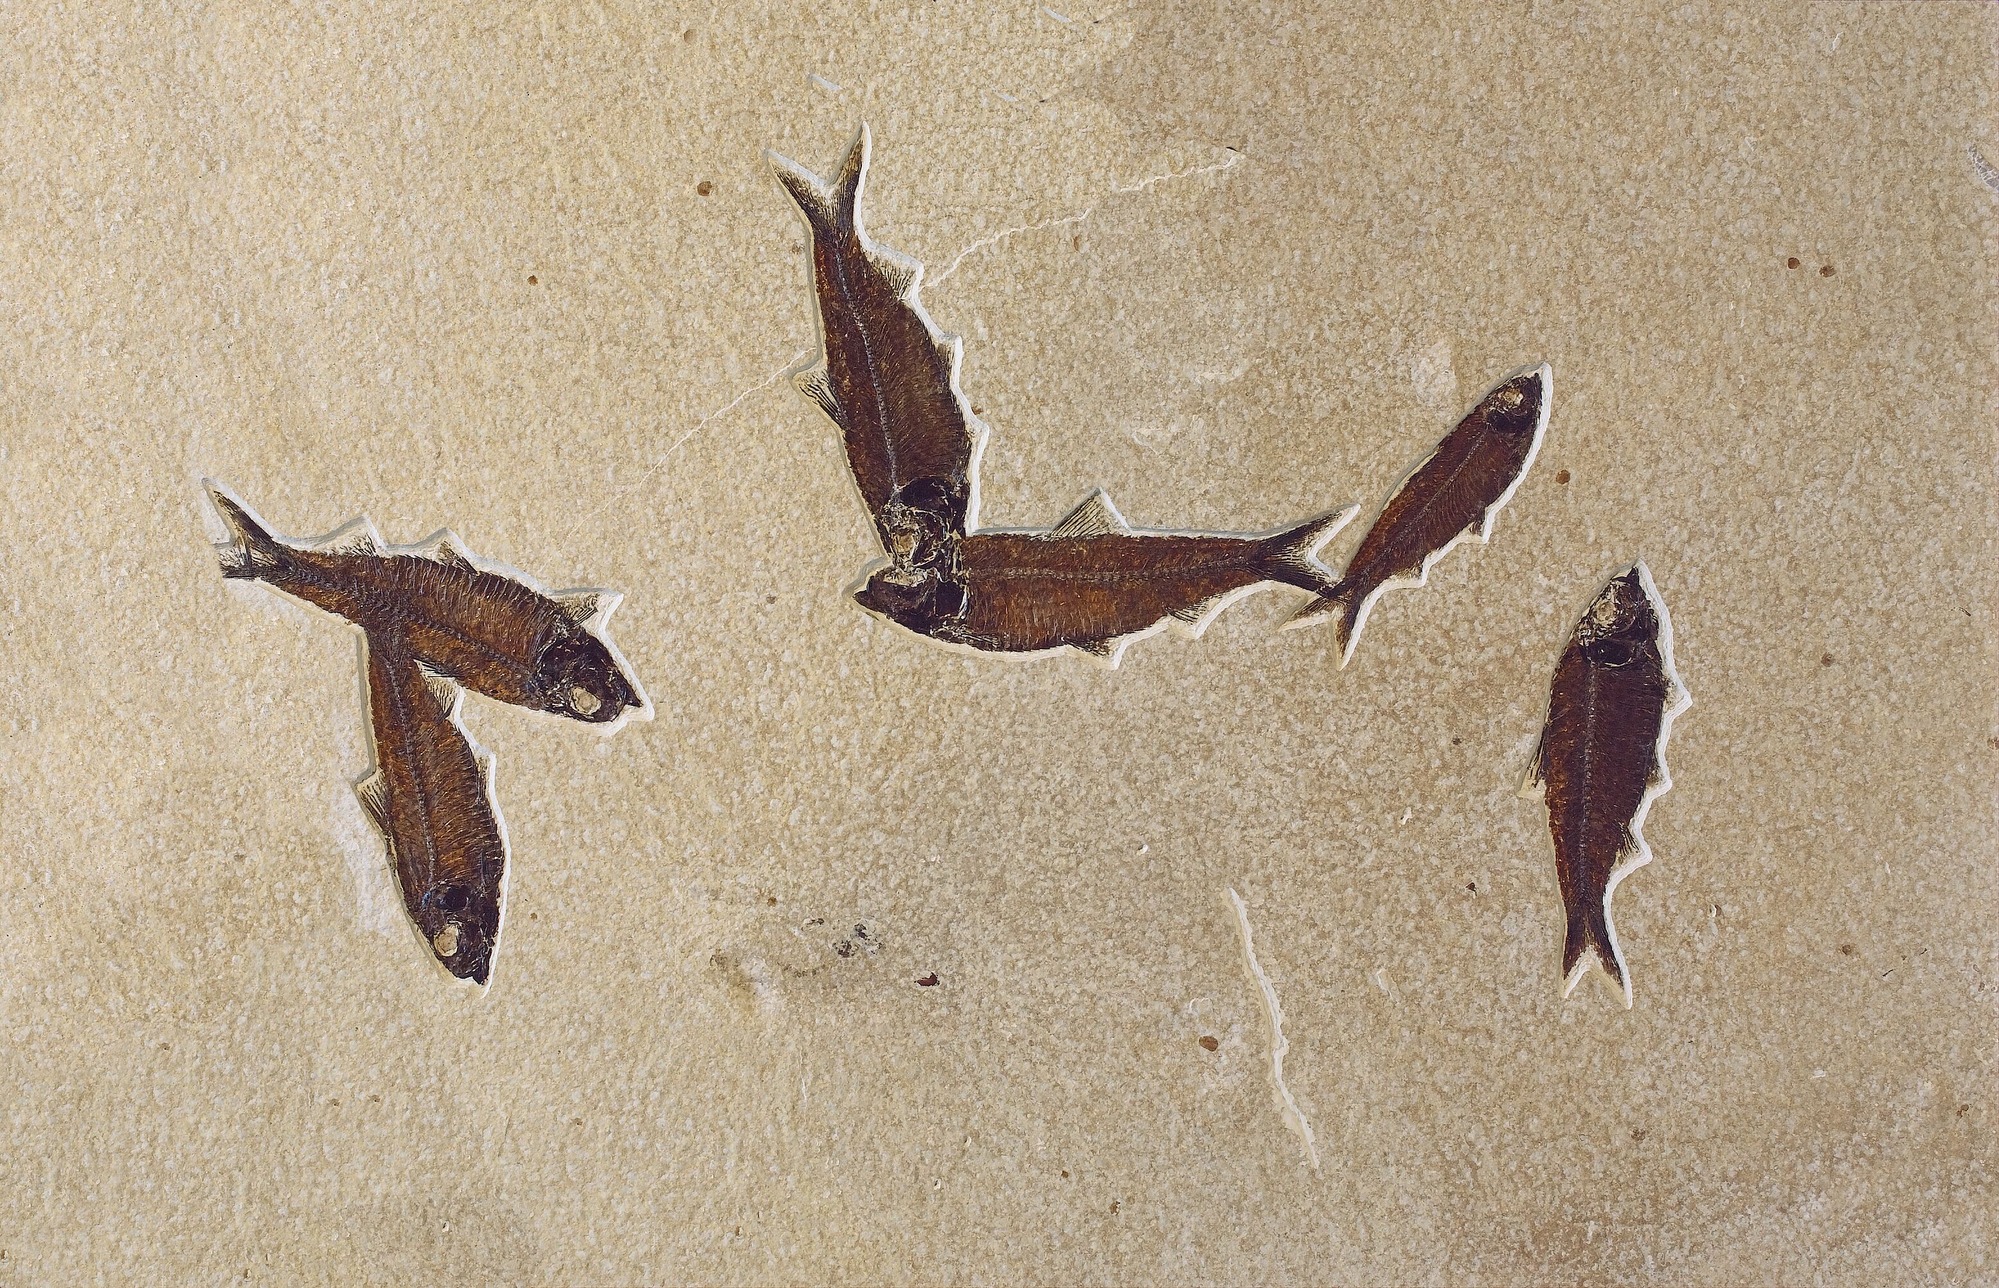 6 dark brown fish fossils on tan stones.  The fish are strewn across the stone, some overlapping.